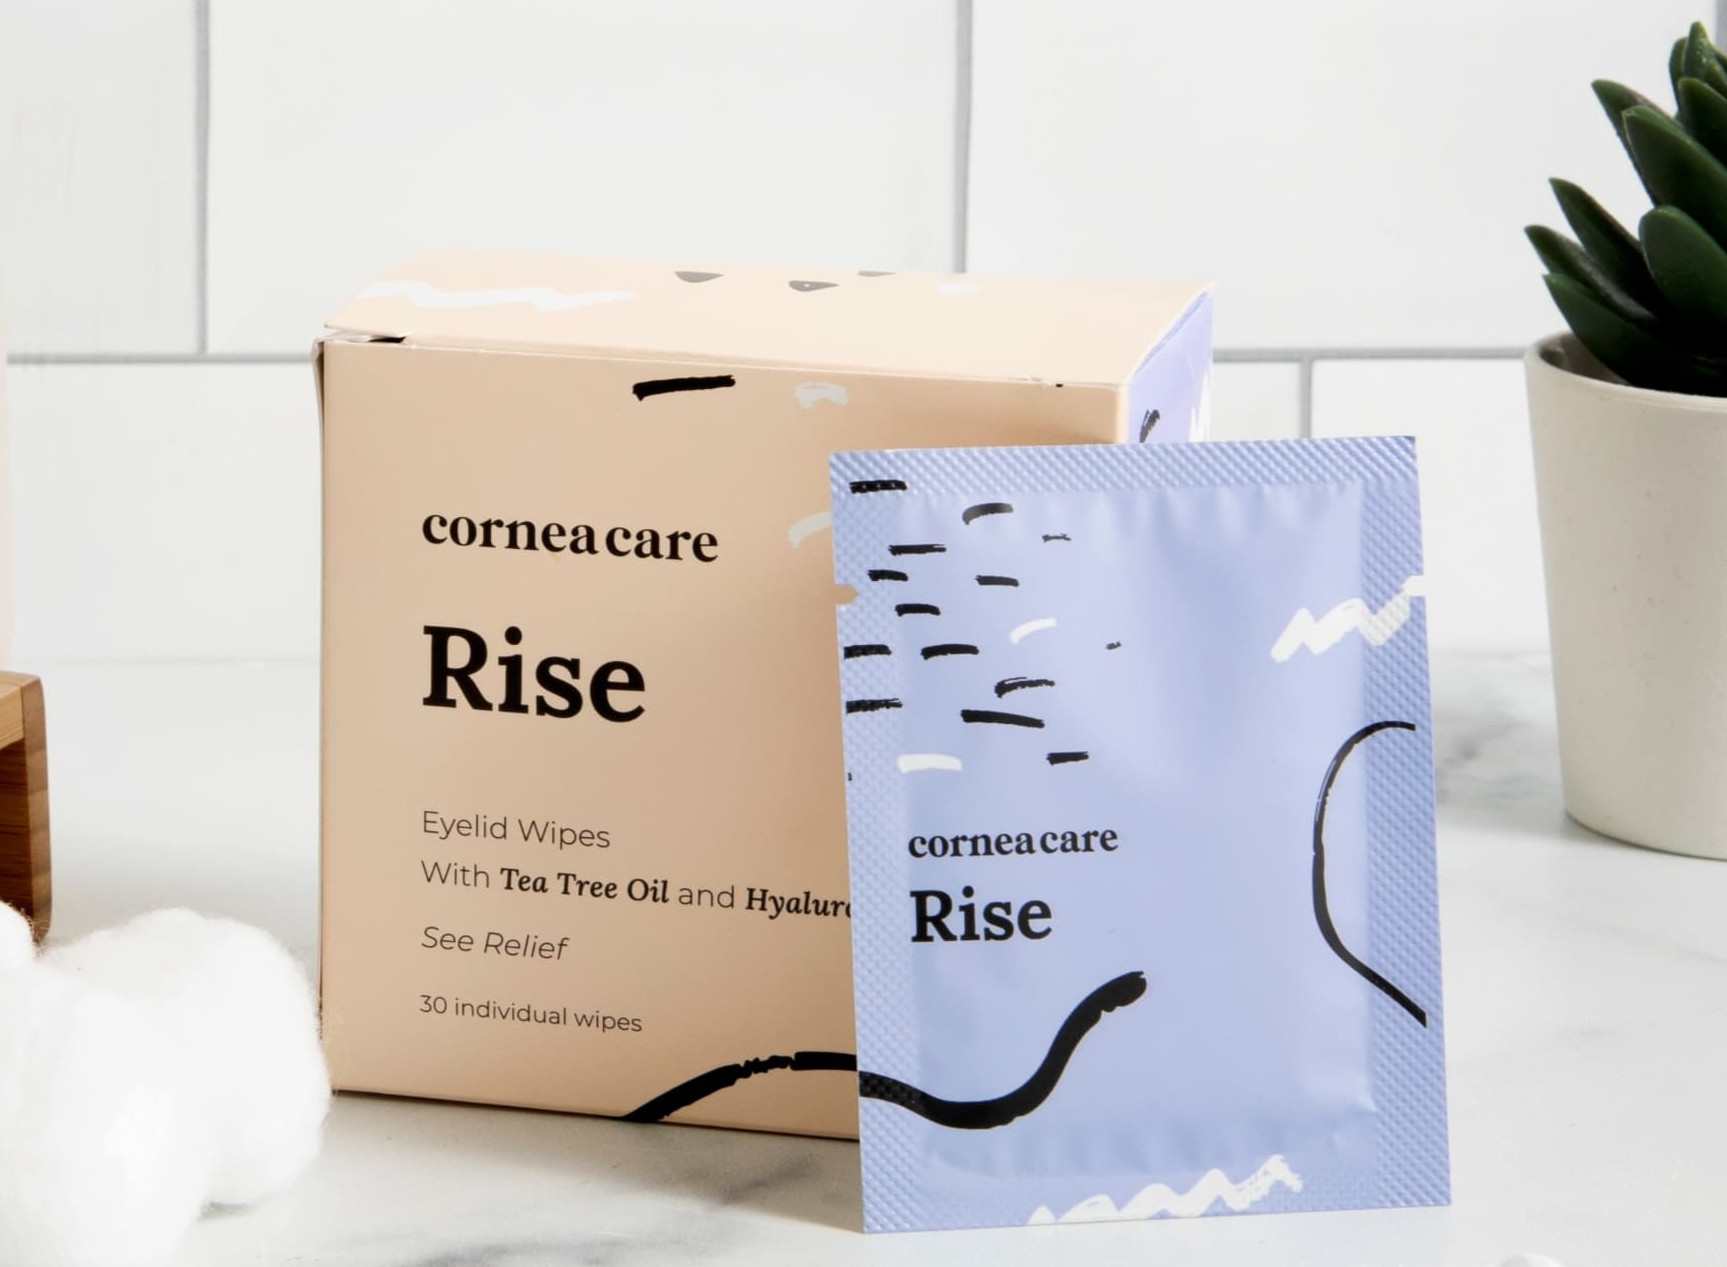 CorneaCare: The Answer to Fall Allergies and Swollen Puffy Eyes